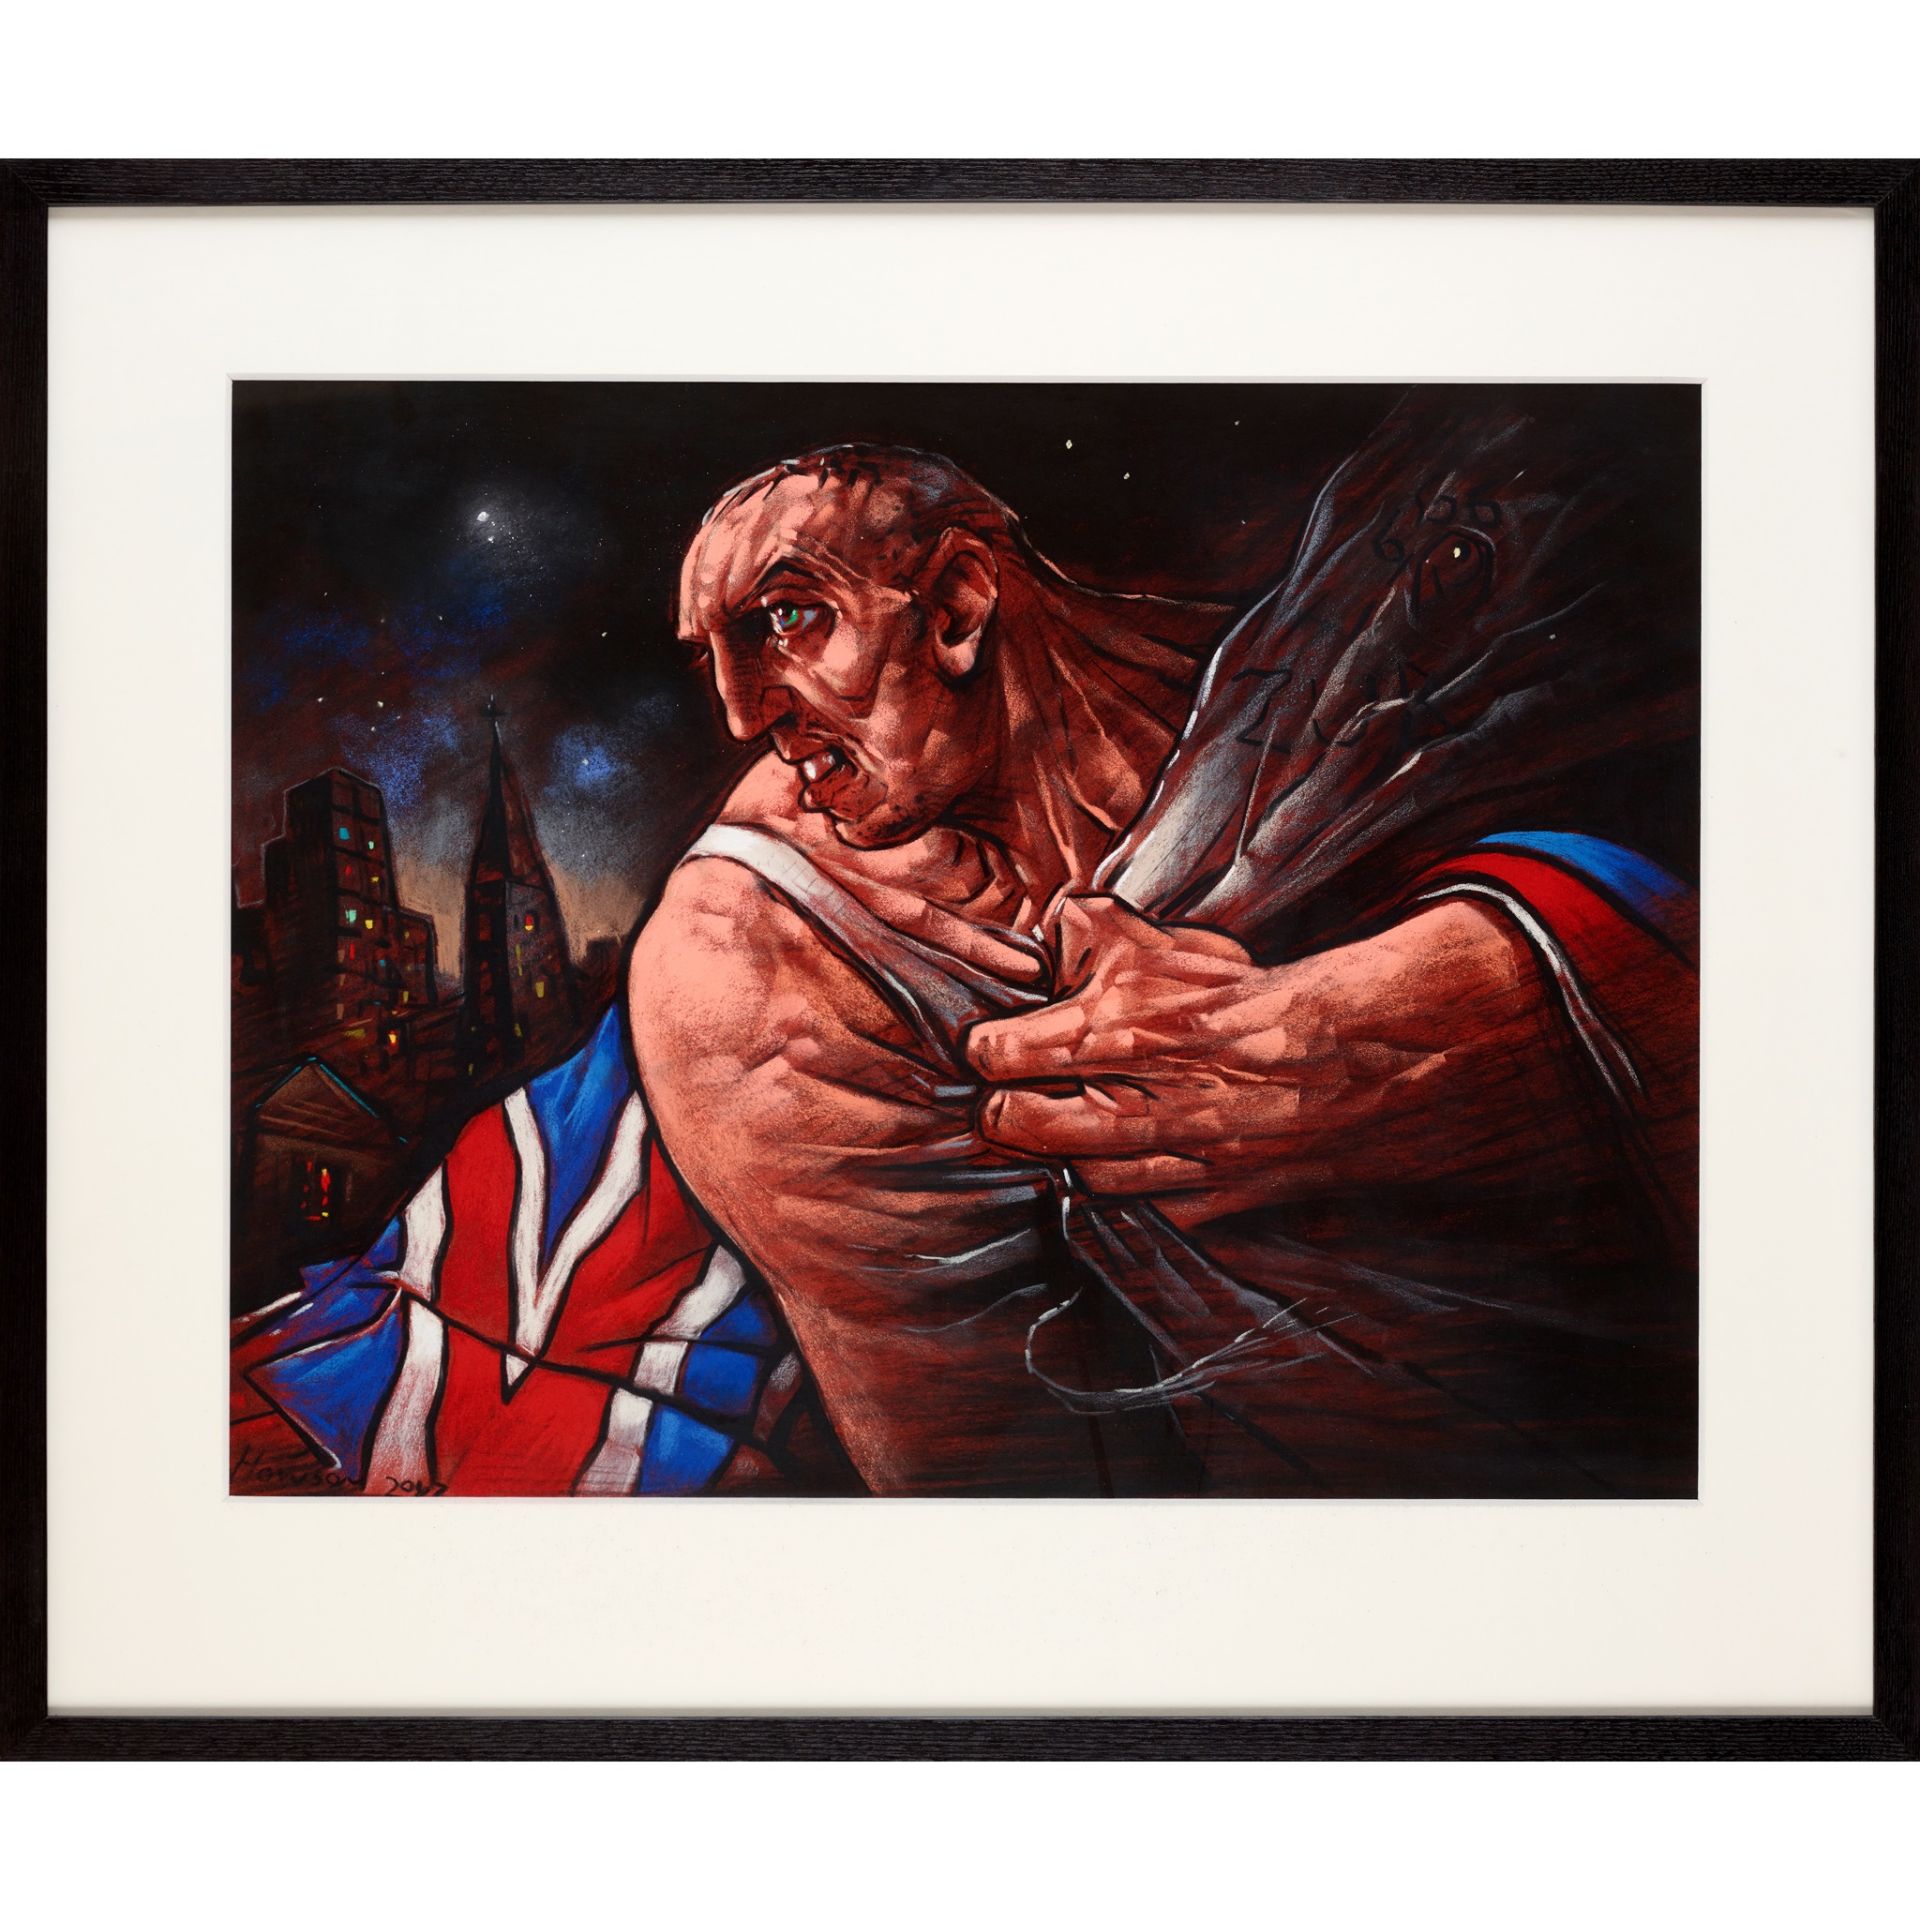 § PETER HOWSON O.B.E. (SCOTTISH 1958-) BREXIT INTO THE ABYSS, 2017 - Image 2 of 3